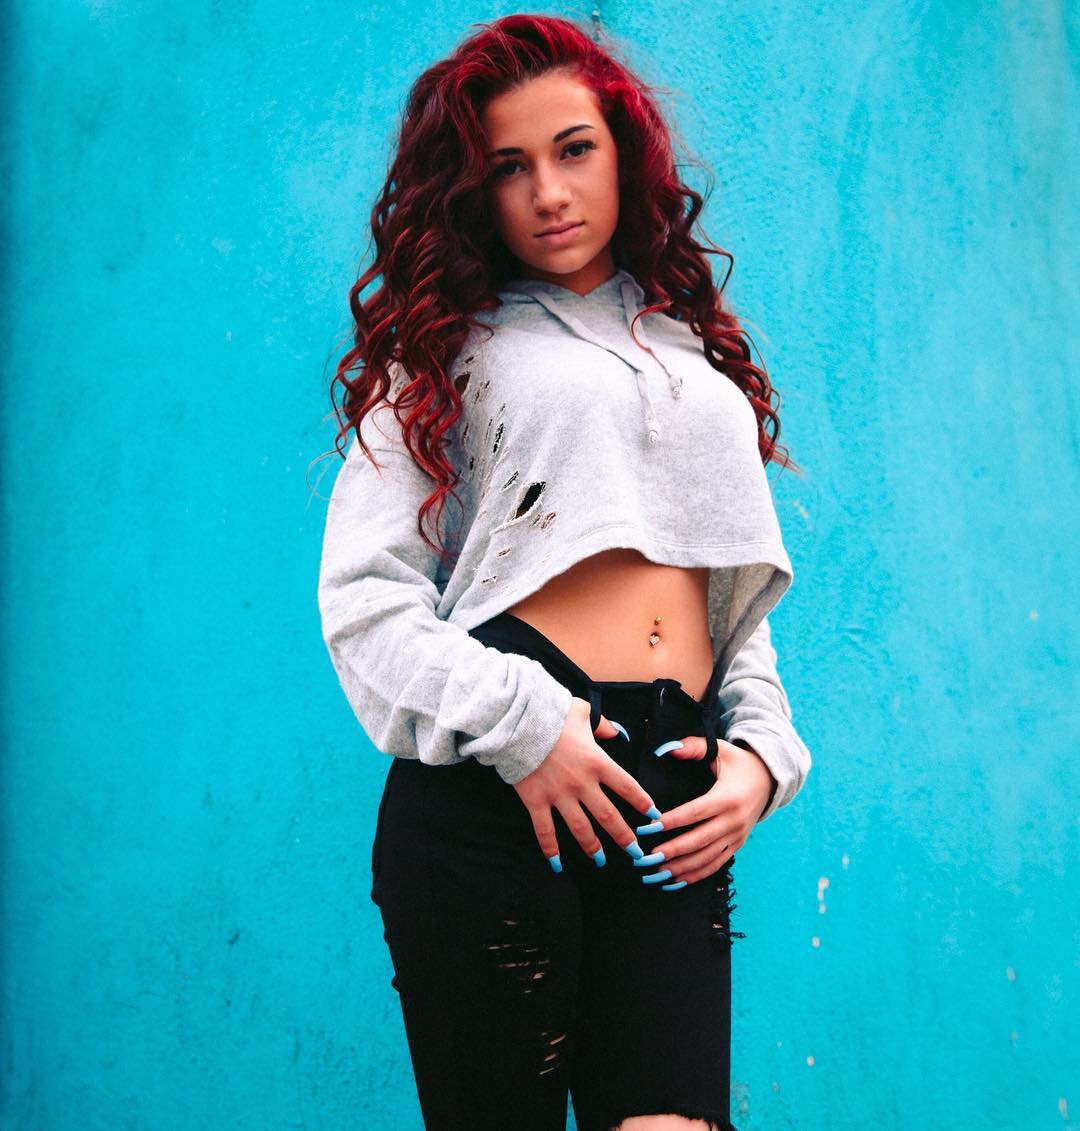 60+ Hottest Danielle Bregoli a.k.a Bhad Bhabie Bikini Pictures That Are Simply Gorgeous | Best Of Comic Books